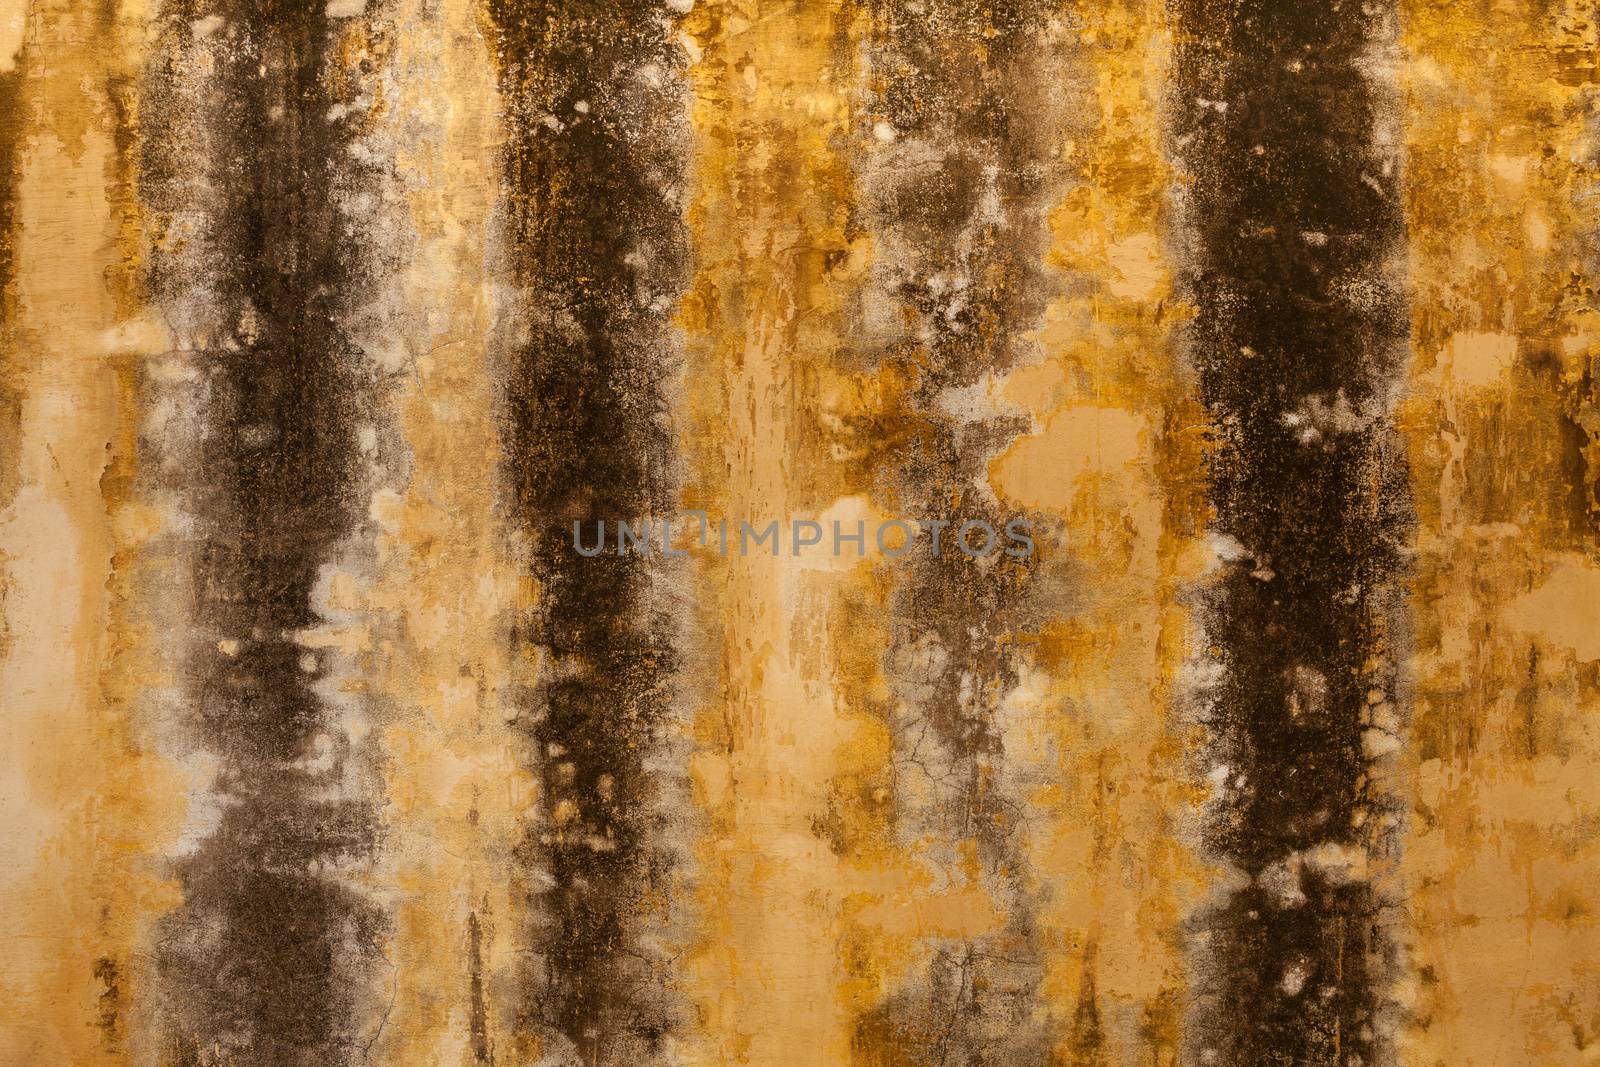 Texture of old grunge rust wall